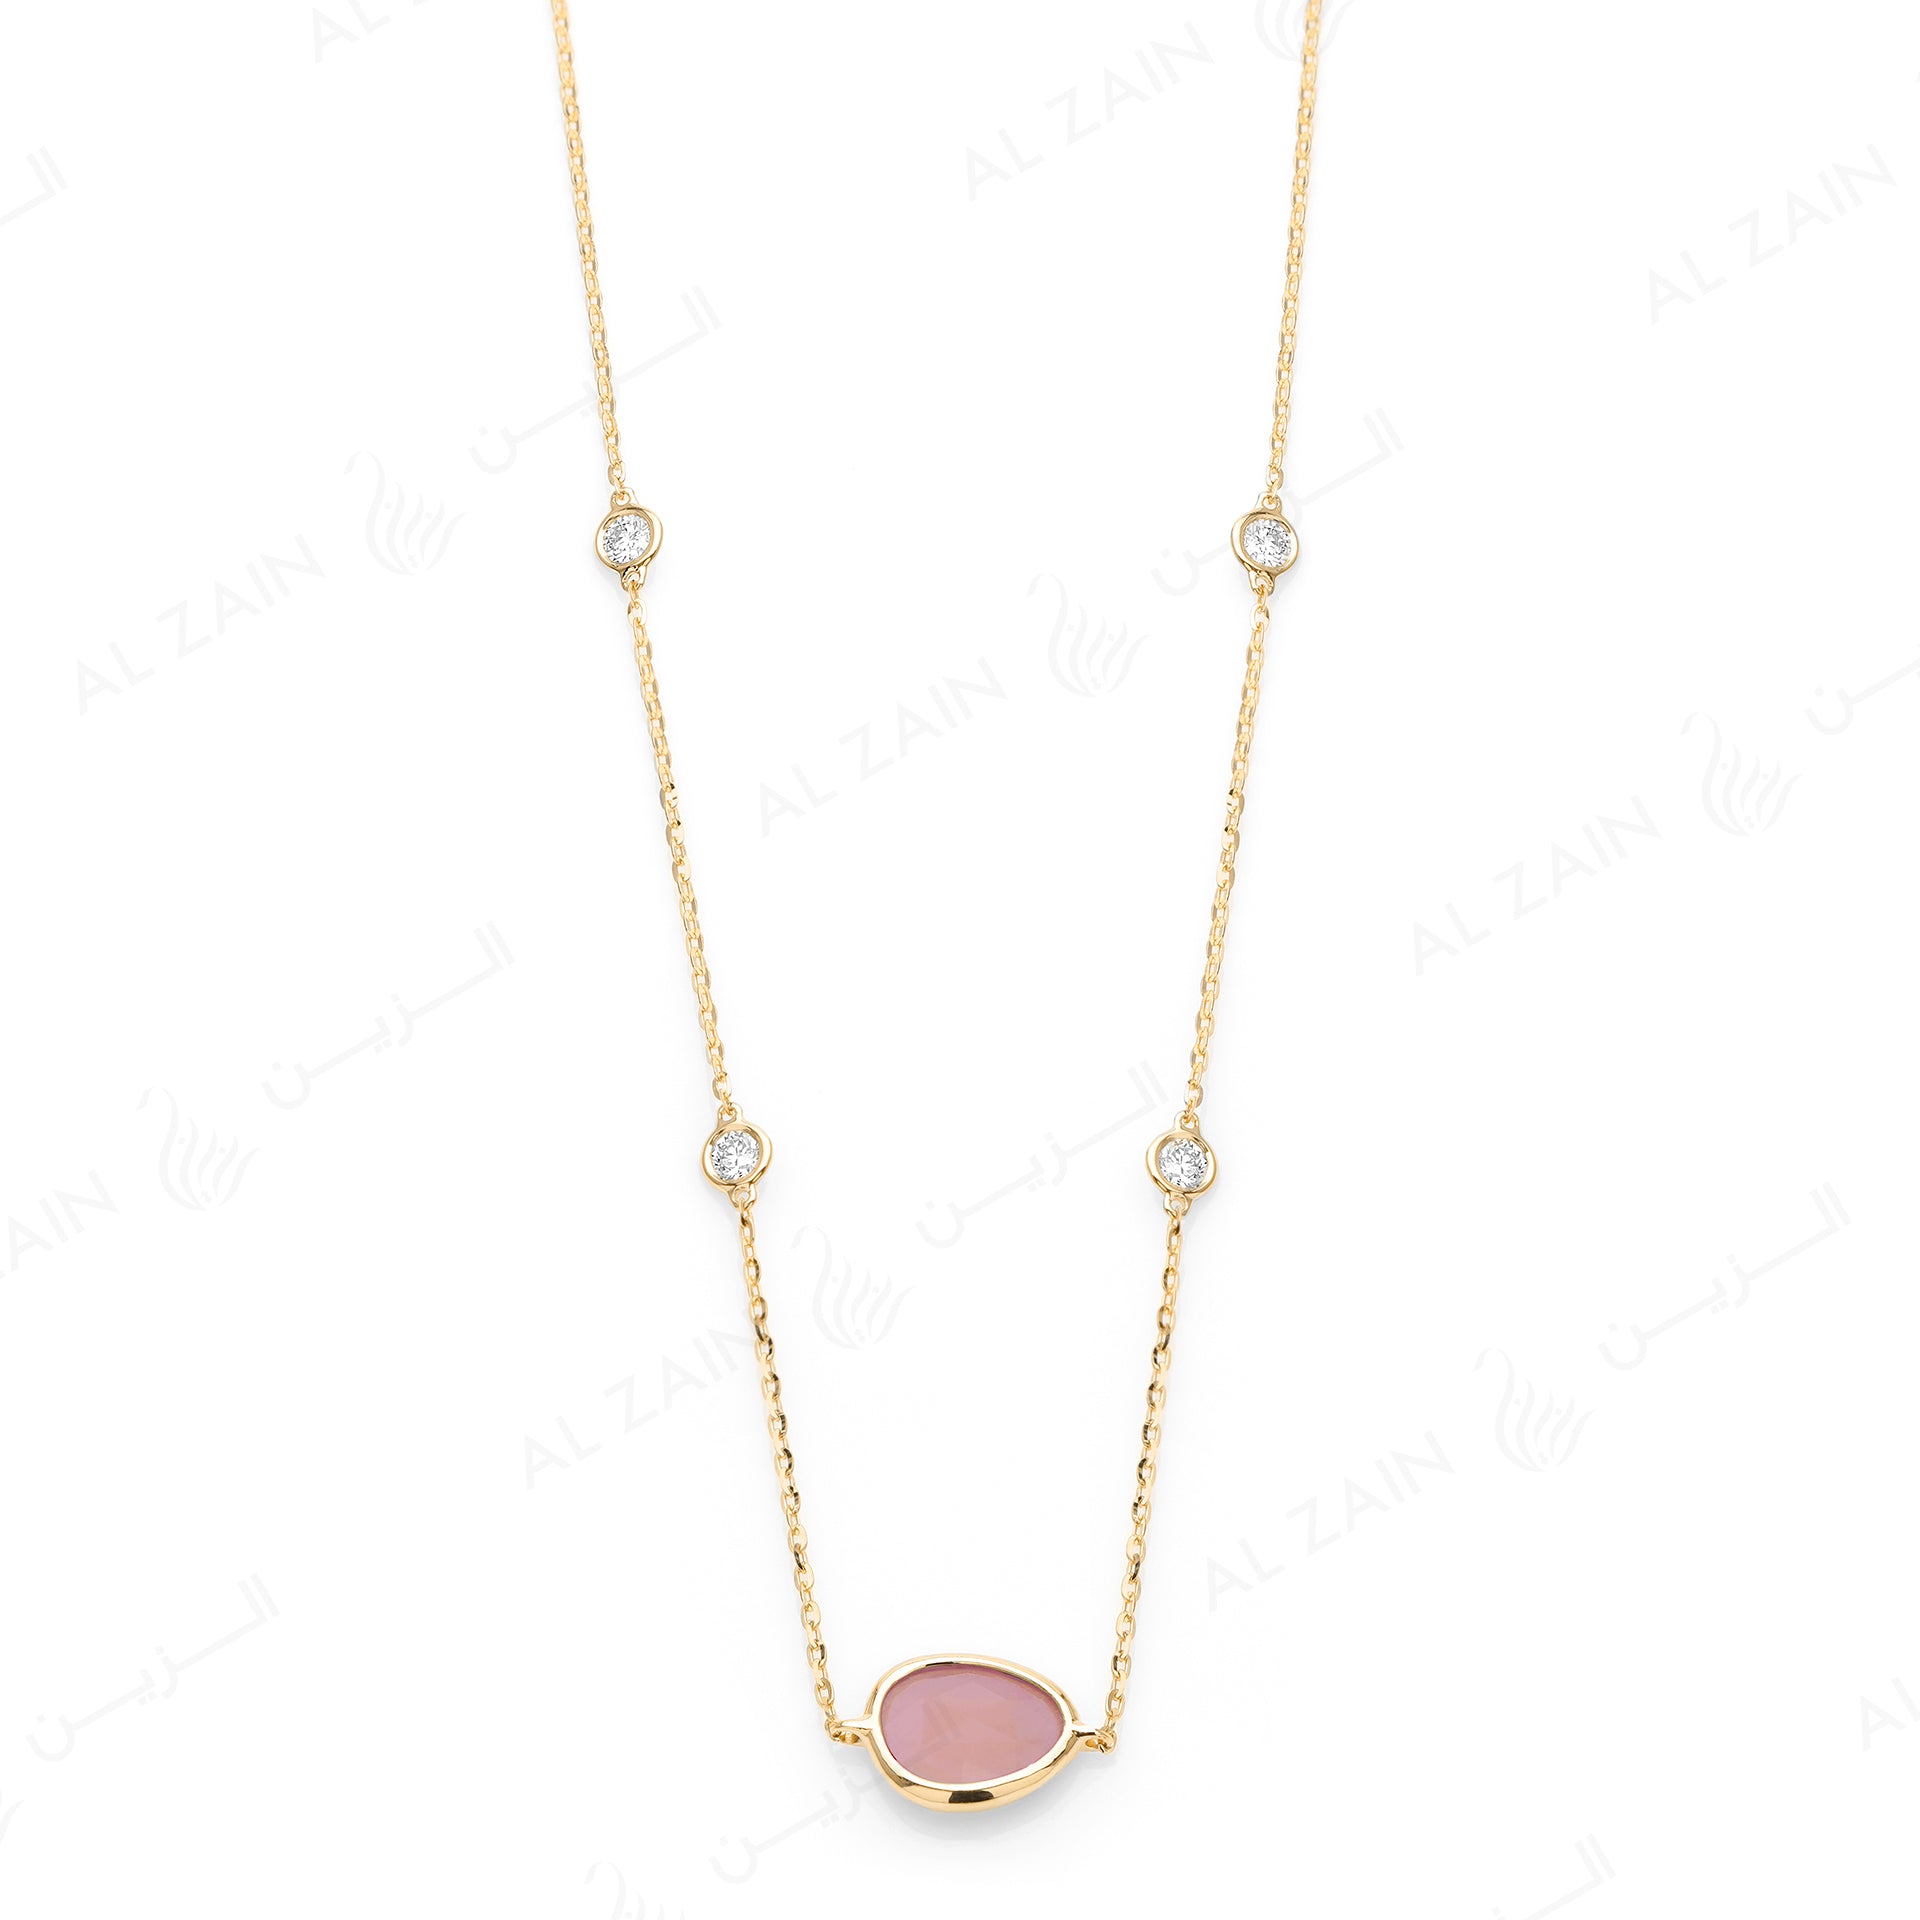 Simply Nina choker in 18k yellow gold with Opal stone and diamonds